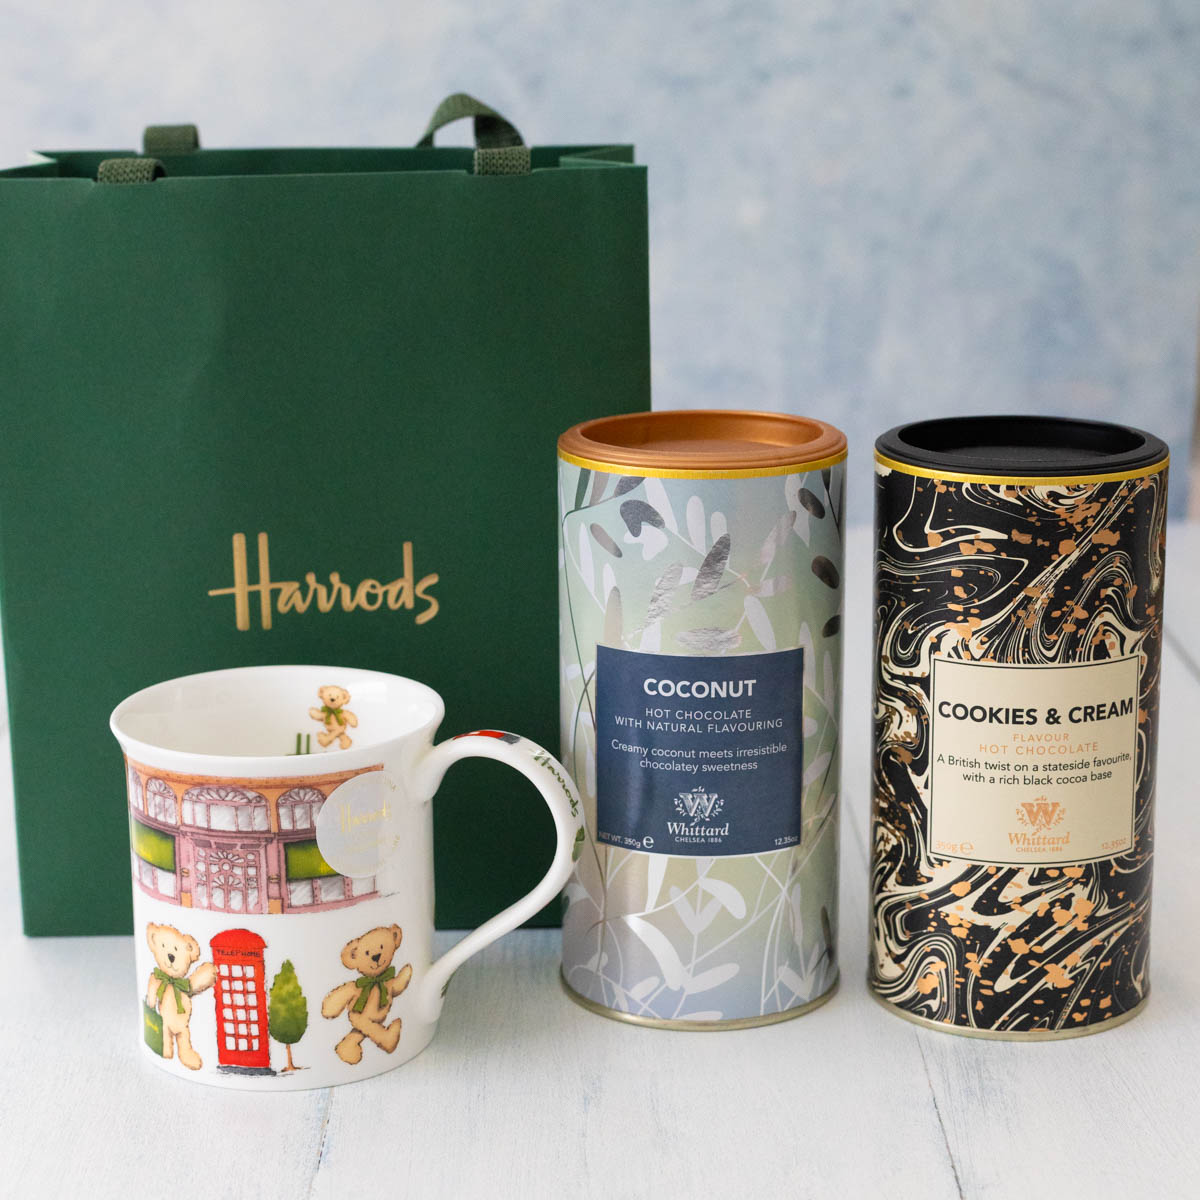 2 canisters of hot cocoa with a fancy mug and a Harrods shopping bag.